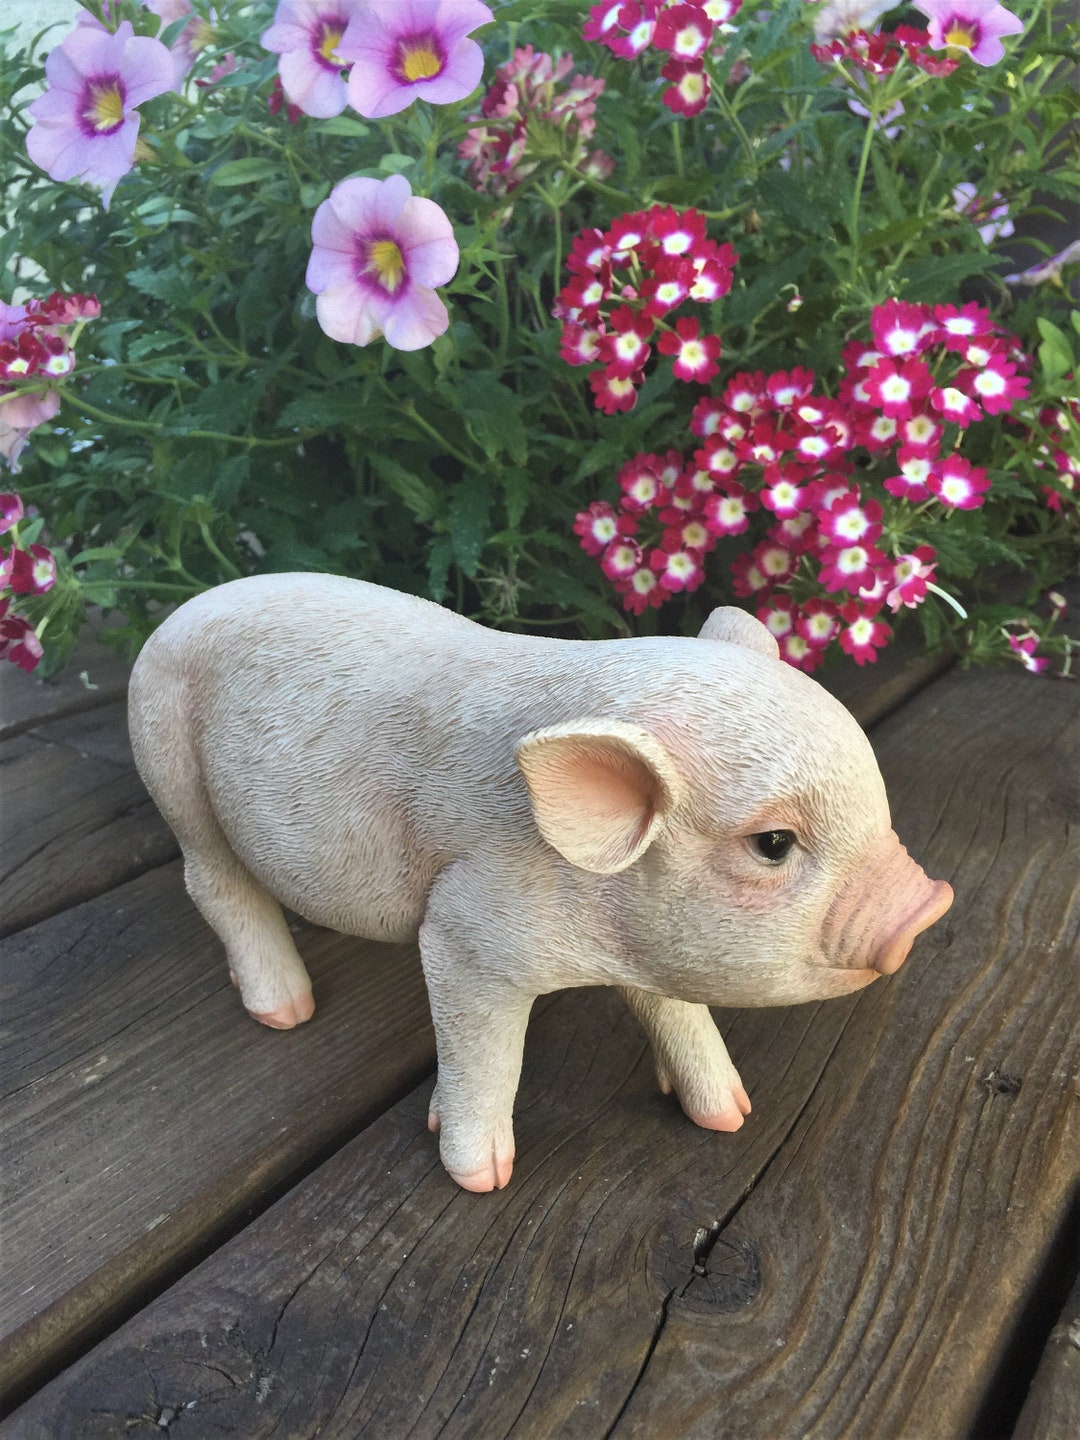 Little Pig Walking Piglet Resin Figurine Statue Ornament 9 Inches